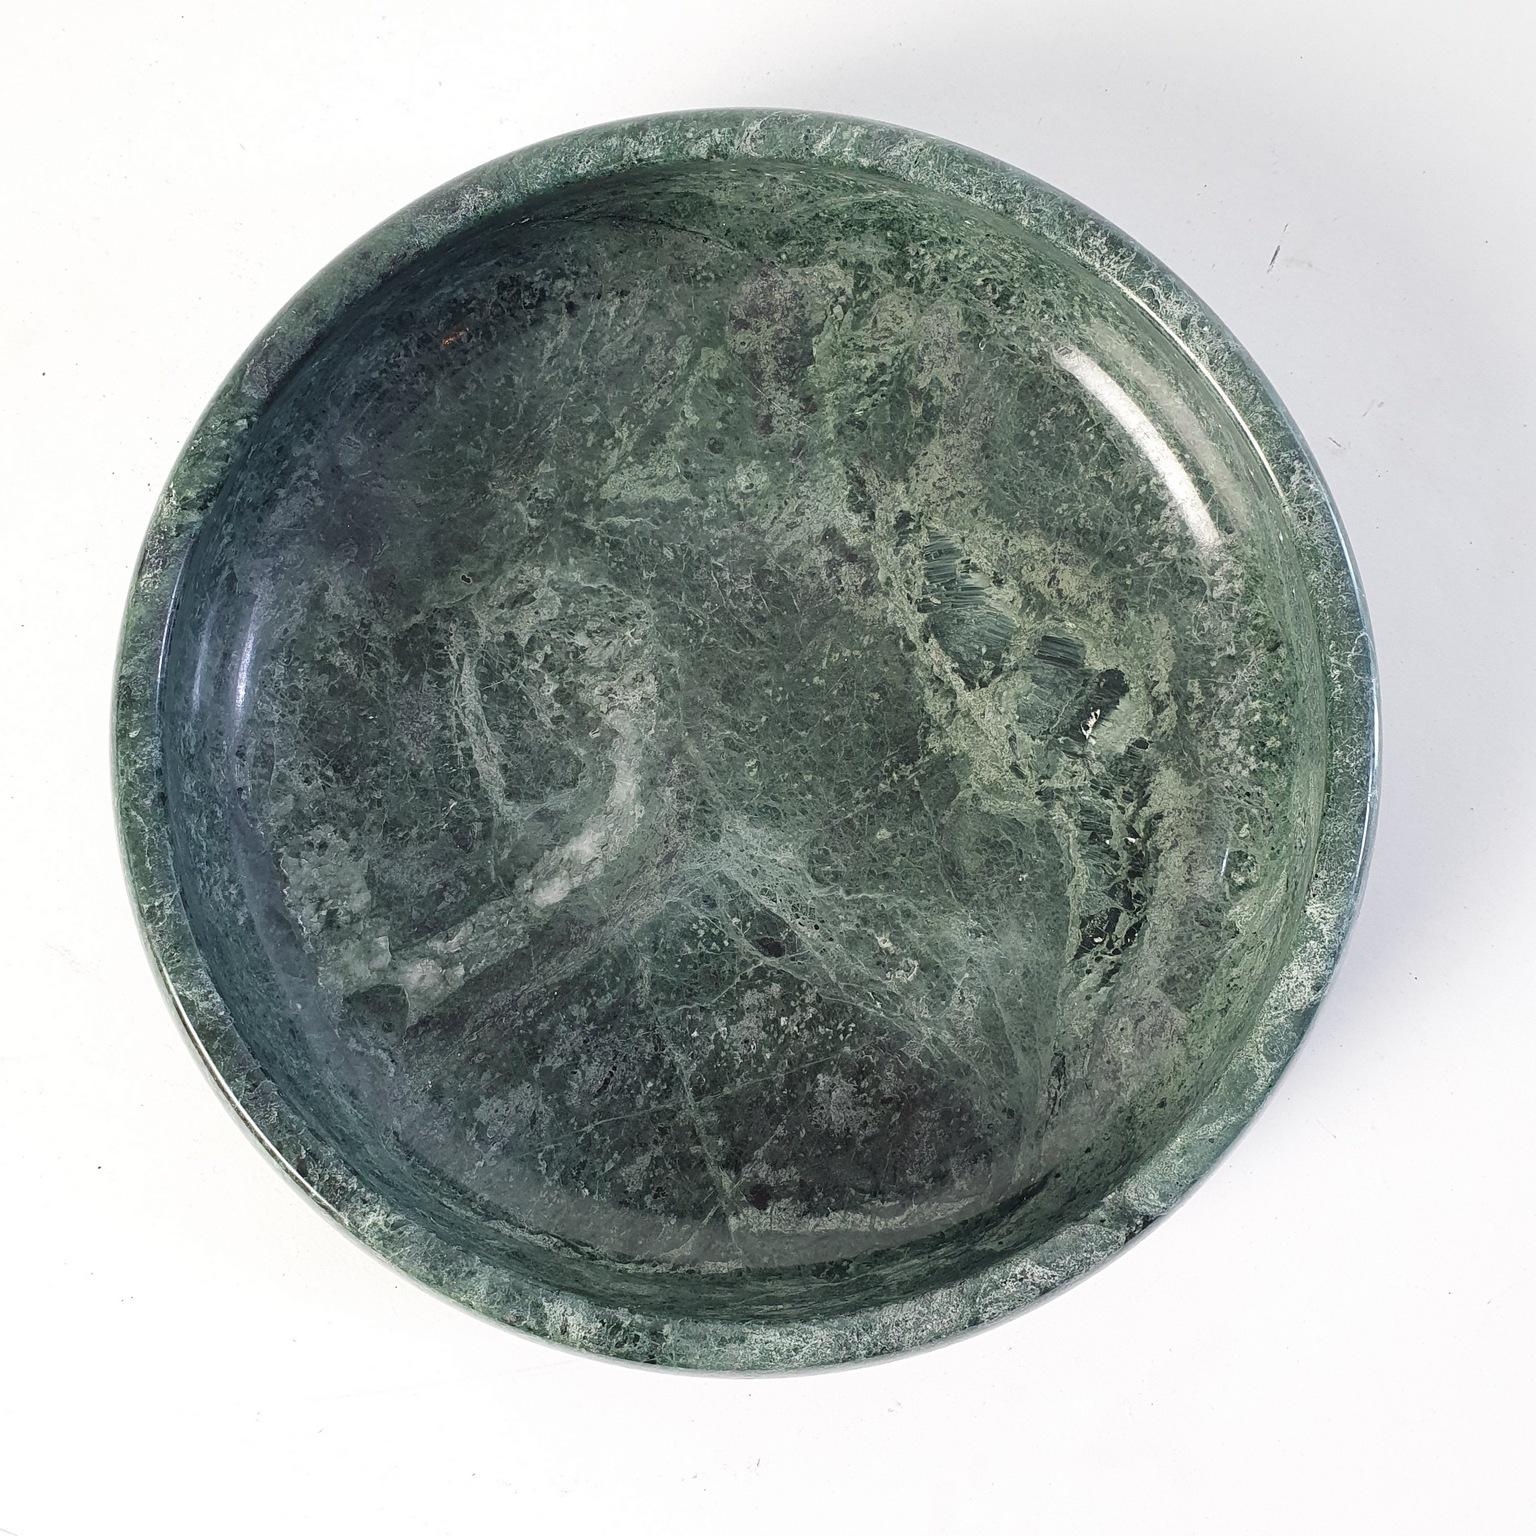 Vintage vide poche bowl in green guatemala marble in extremely good condition and without any damages.